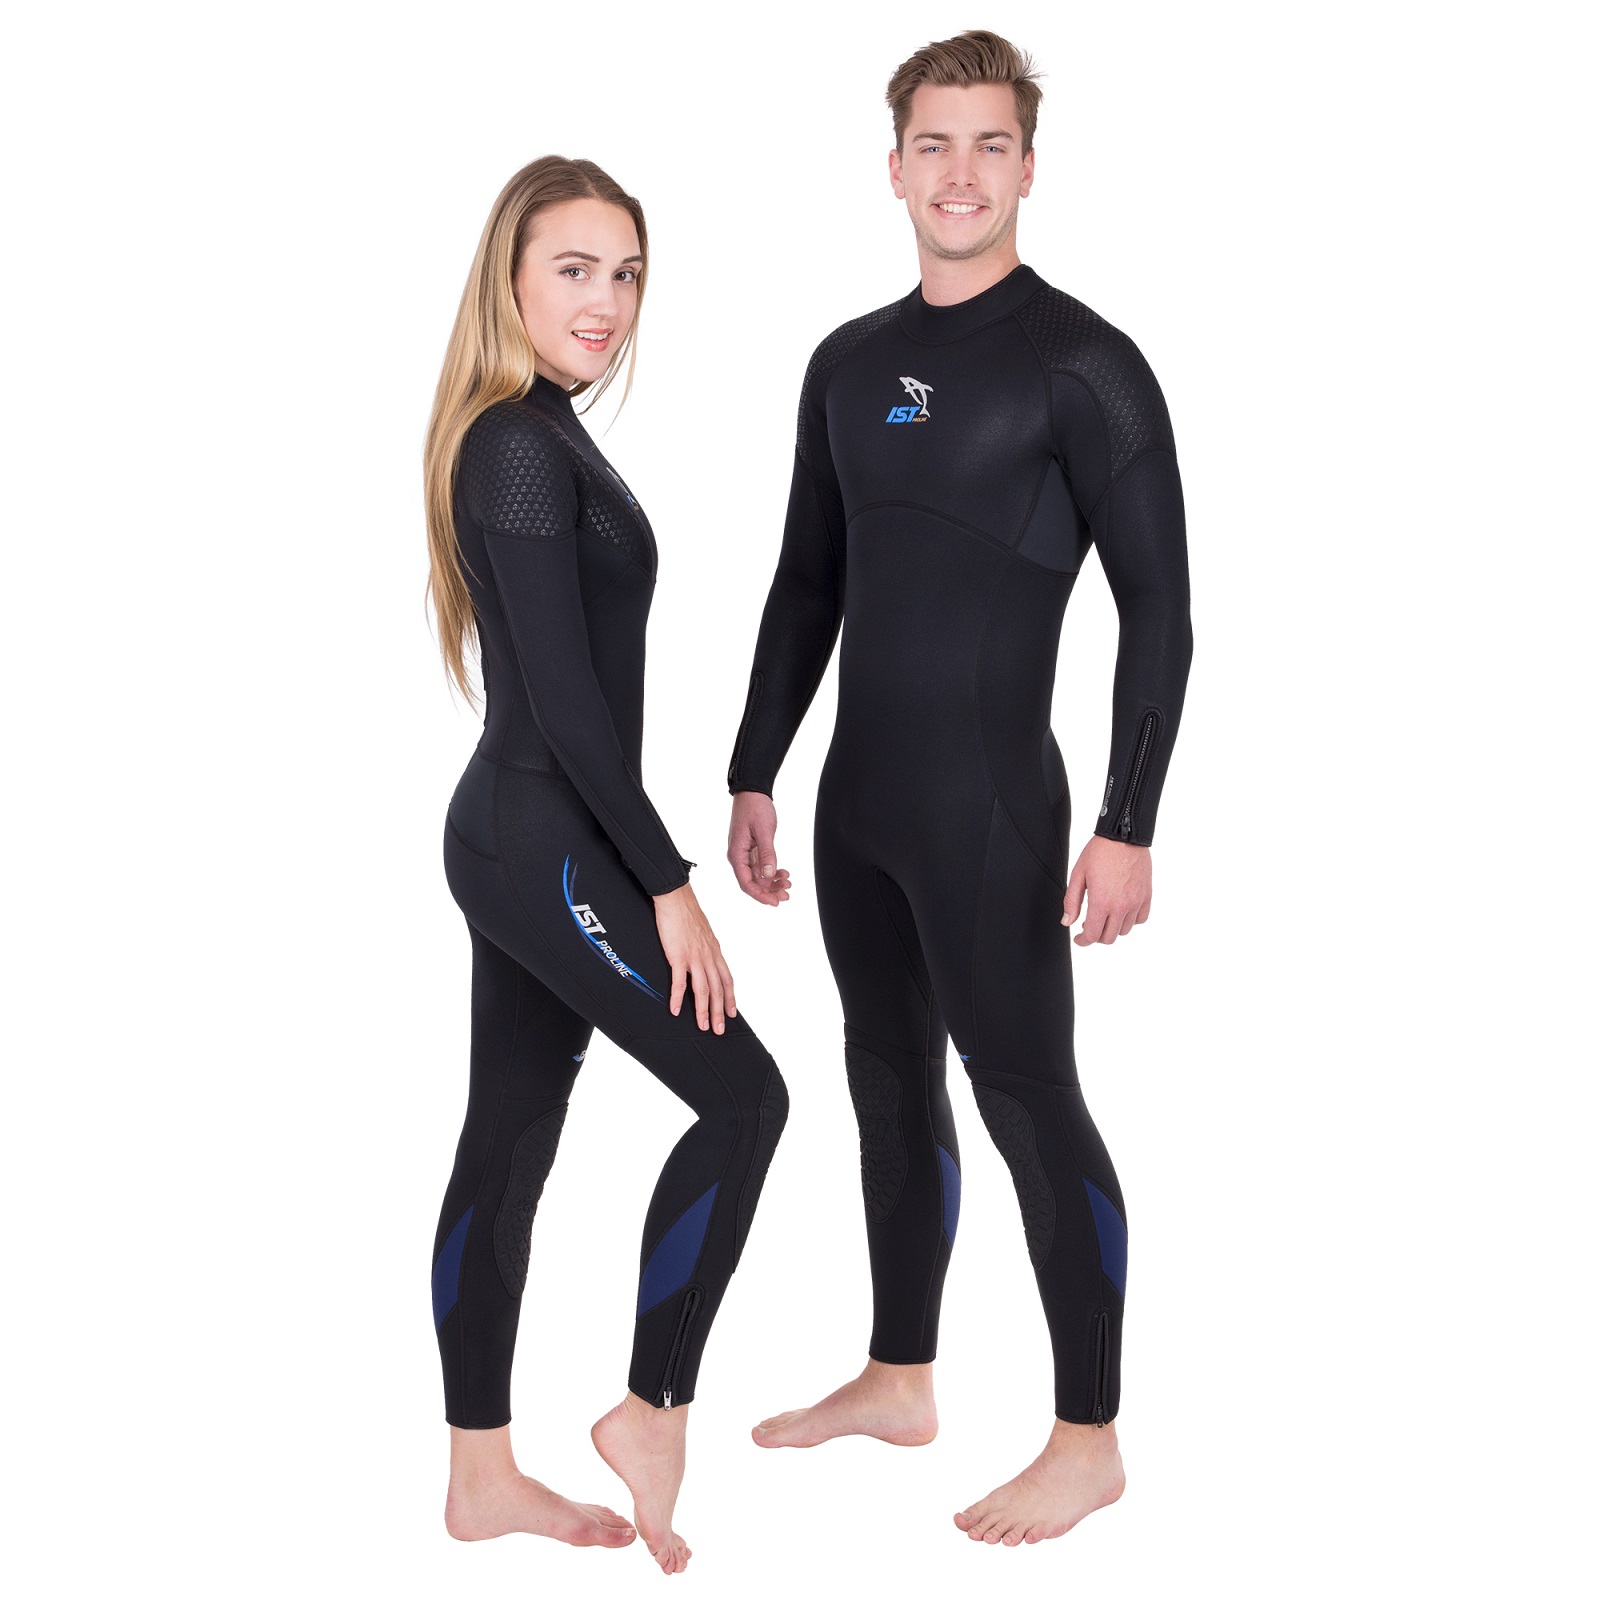 IST WS8 3mm 5mm 7mm Premium Diving Jumpsuit with Super-Stretch Panels for Men